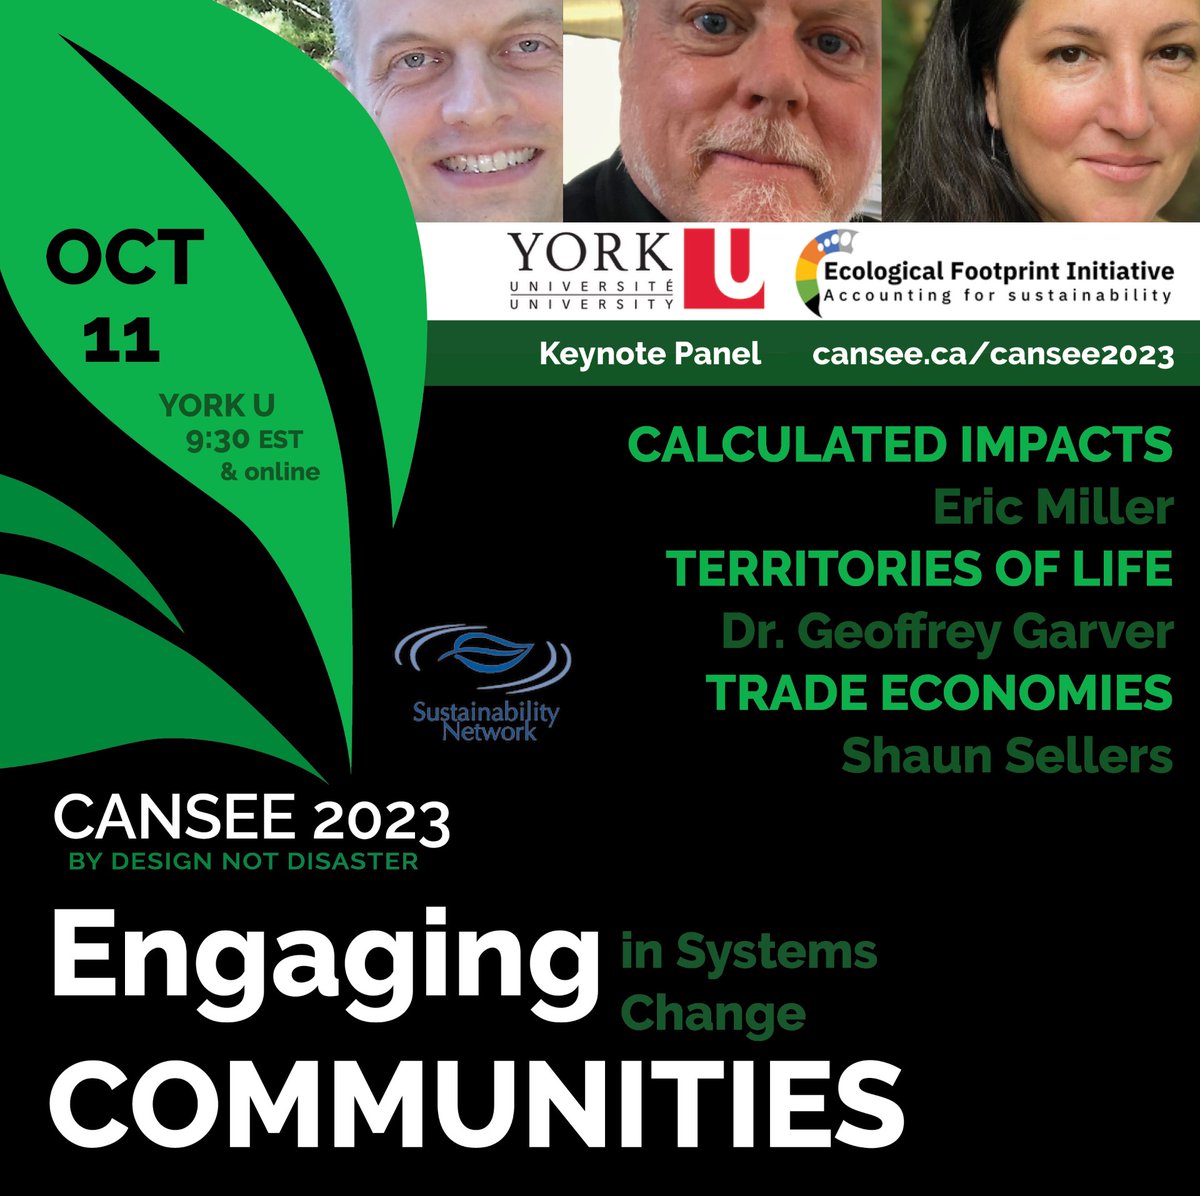 L4E and E4A will be in the house at CANSEE2023!  Starting with this keynote panel on October 11, the program is full of presentations, workshops and more featuring our community.  #CANSEE2023